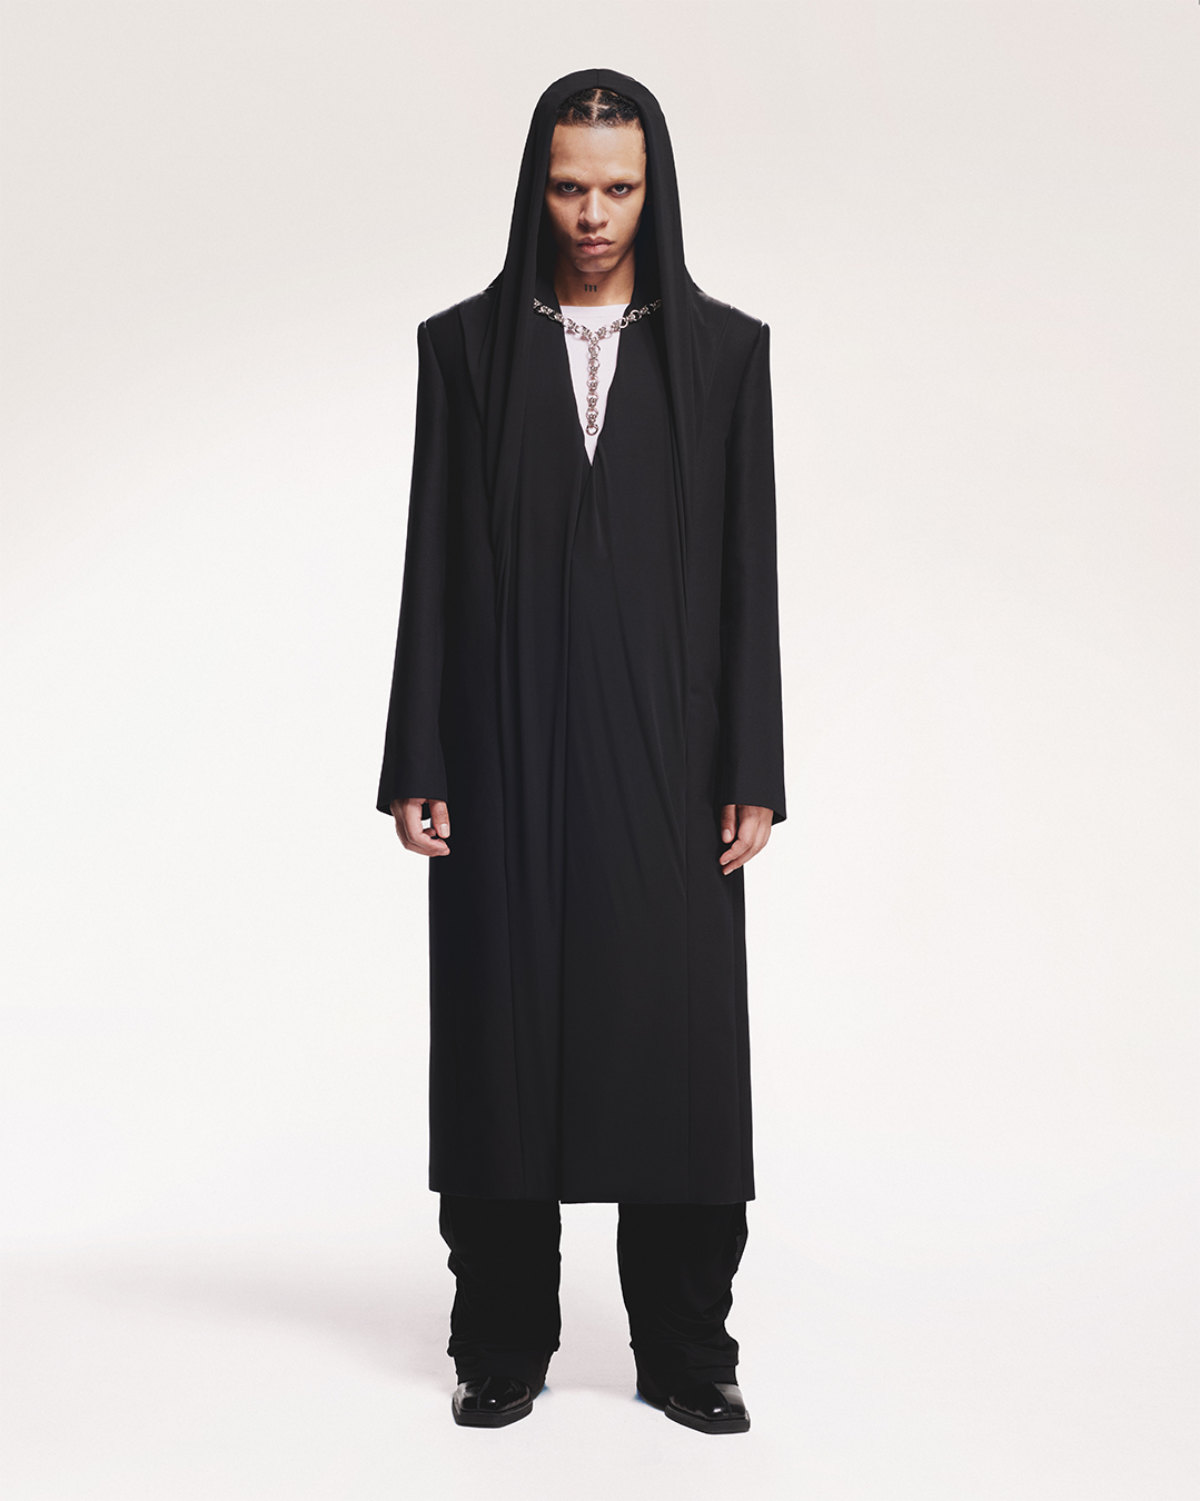 Y/Project Presents Its New Fall/Winter 2024 Collection